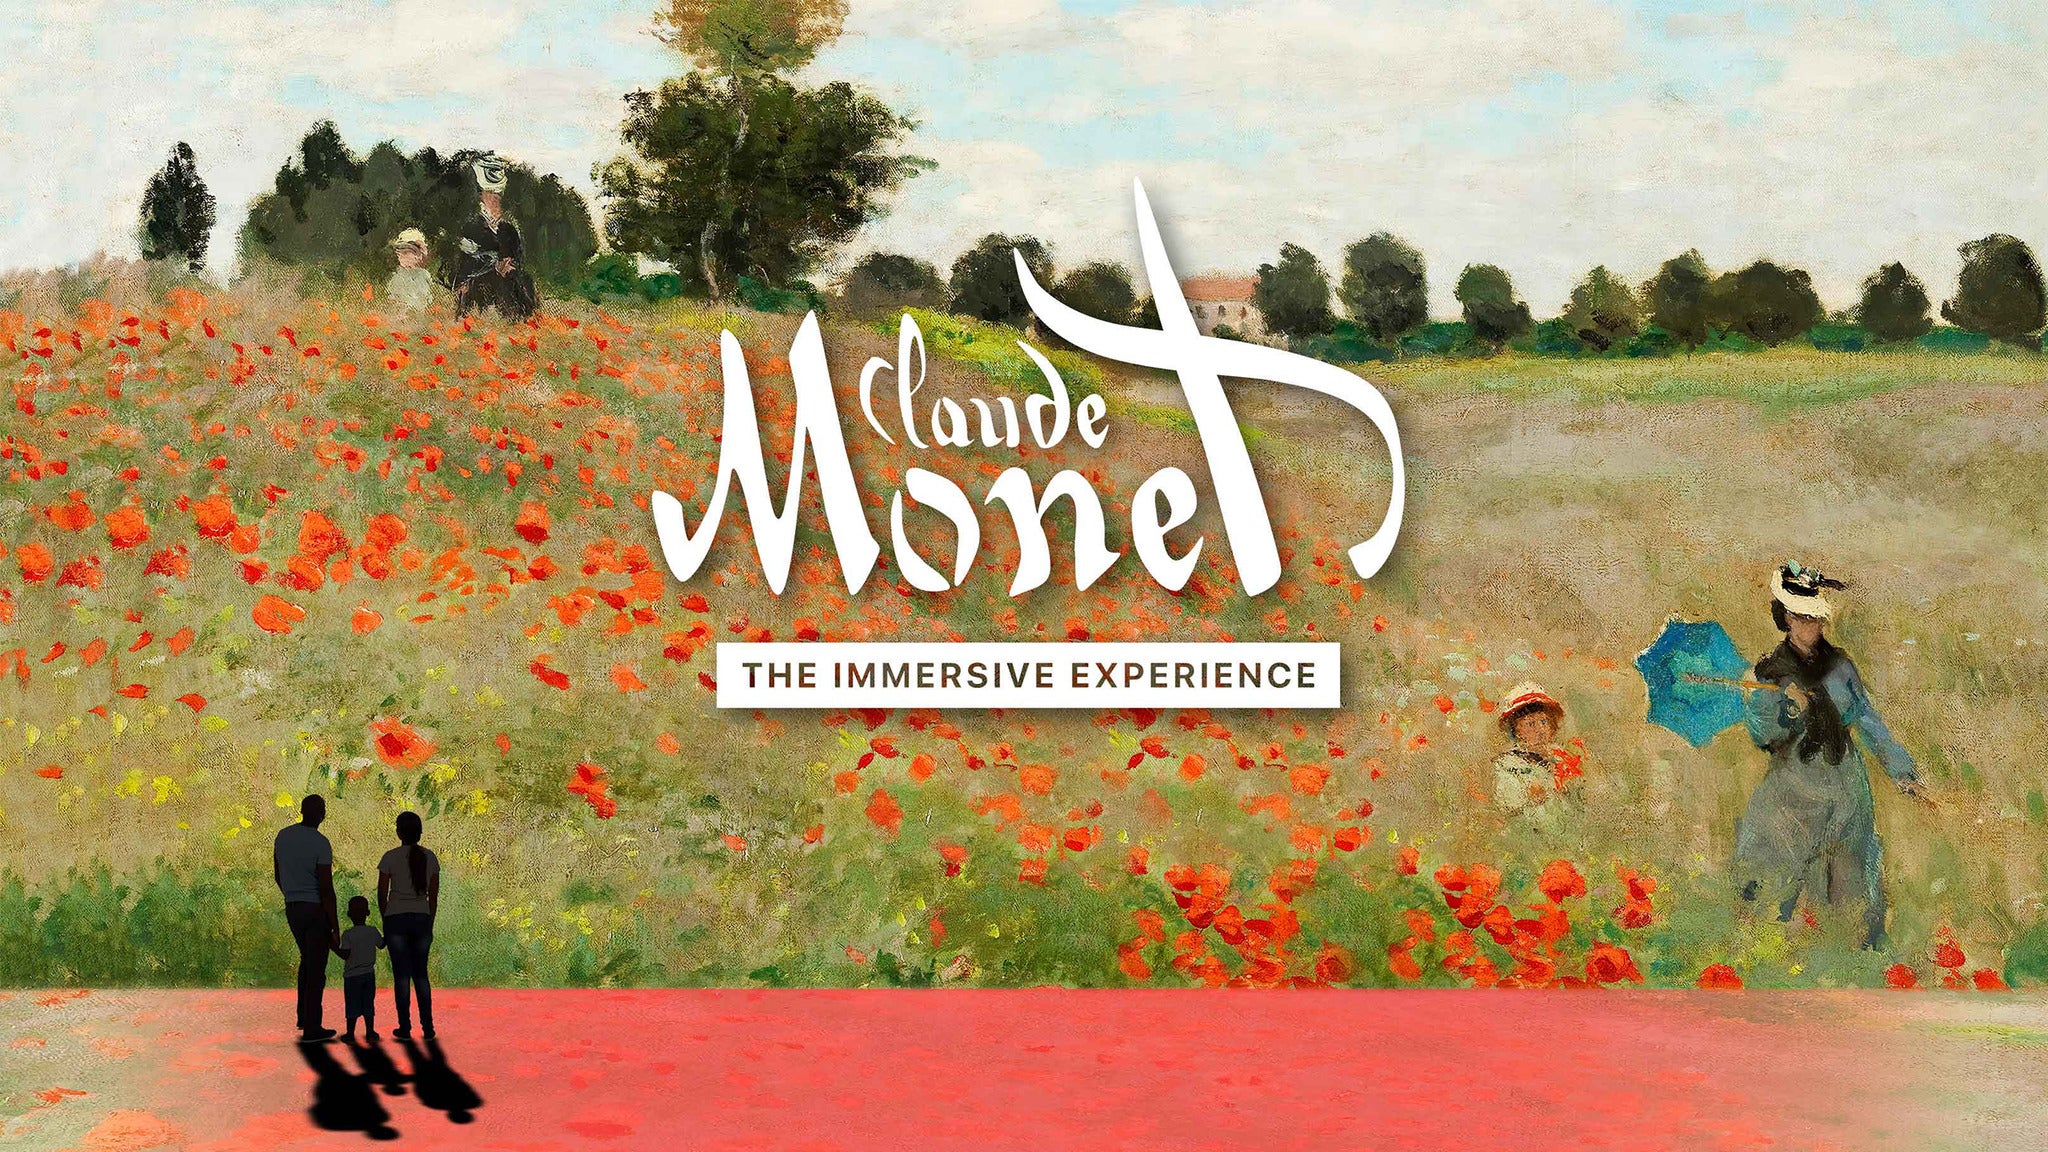 Monet, The Immersive Experience